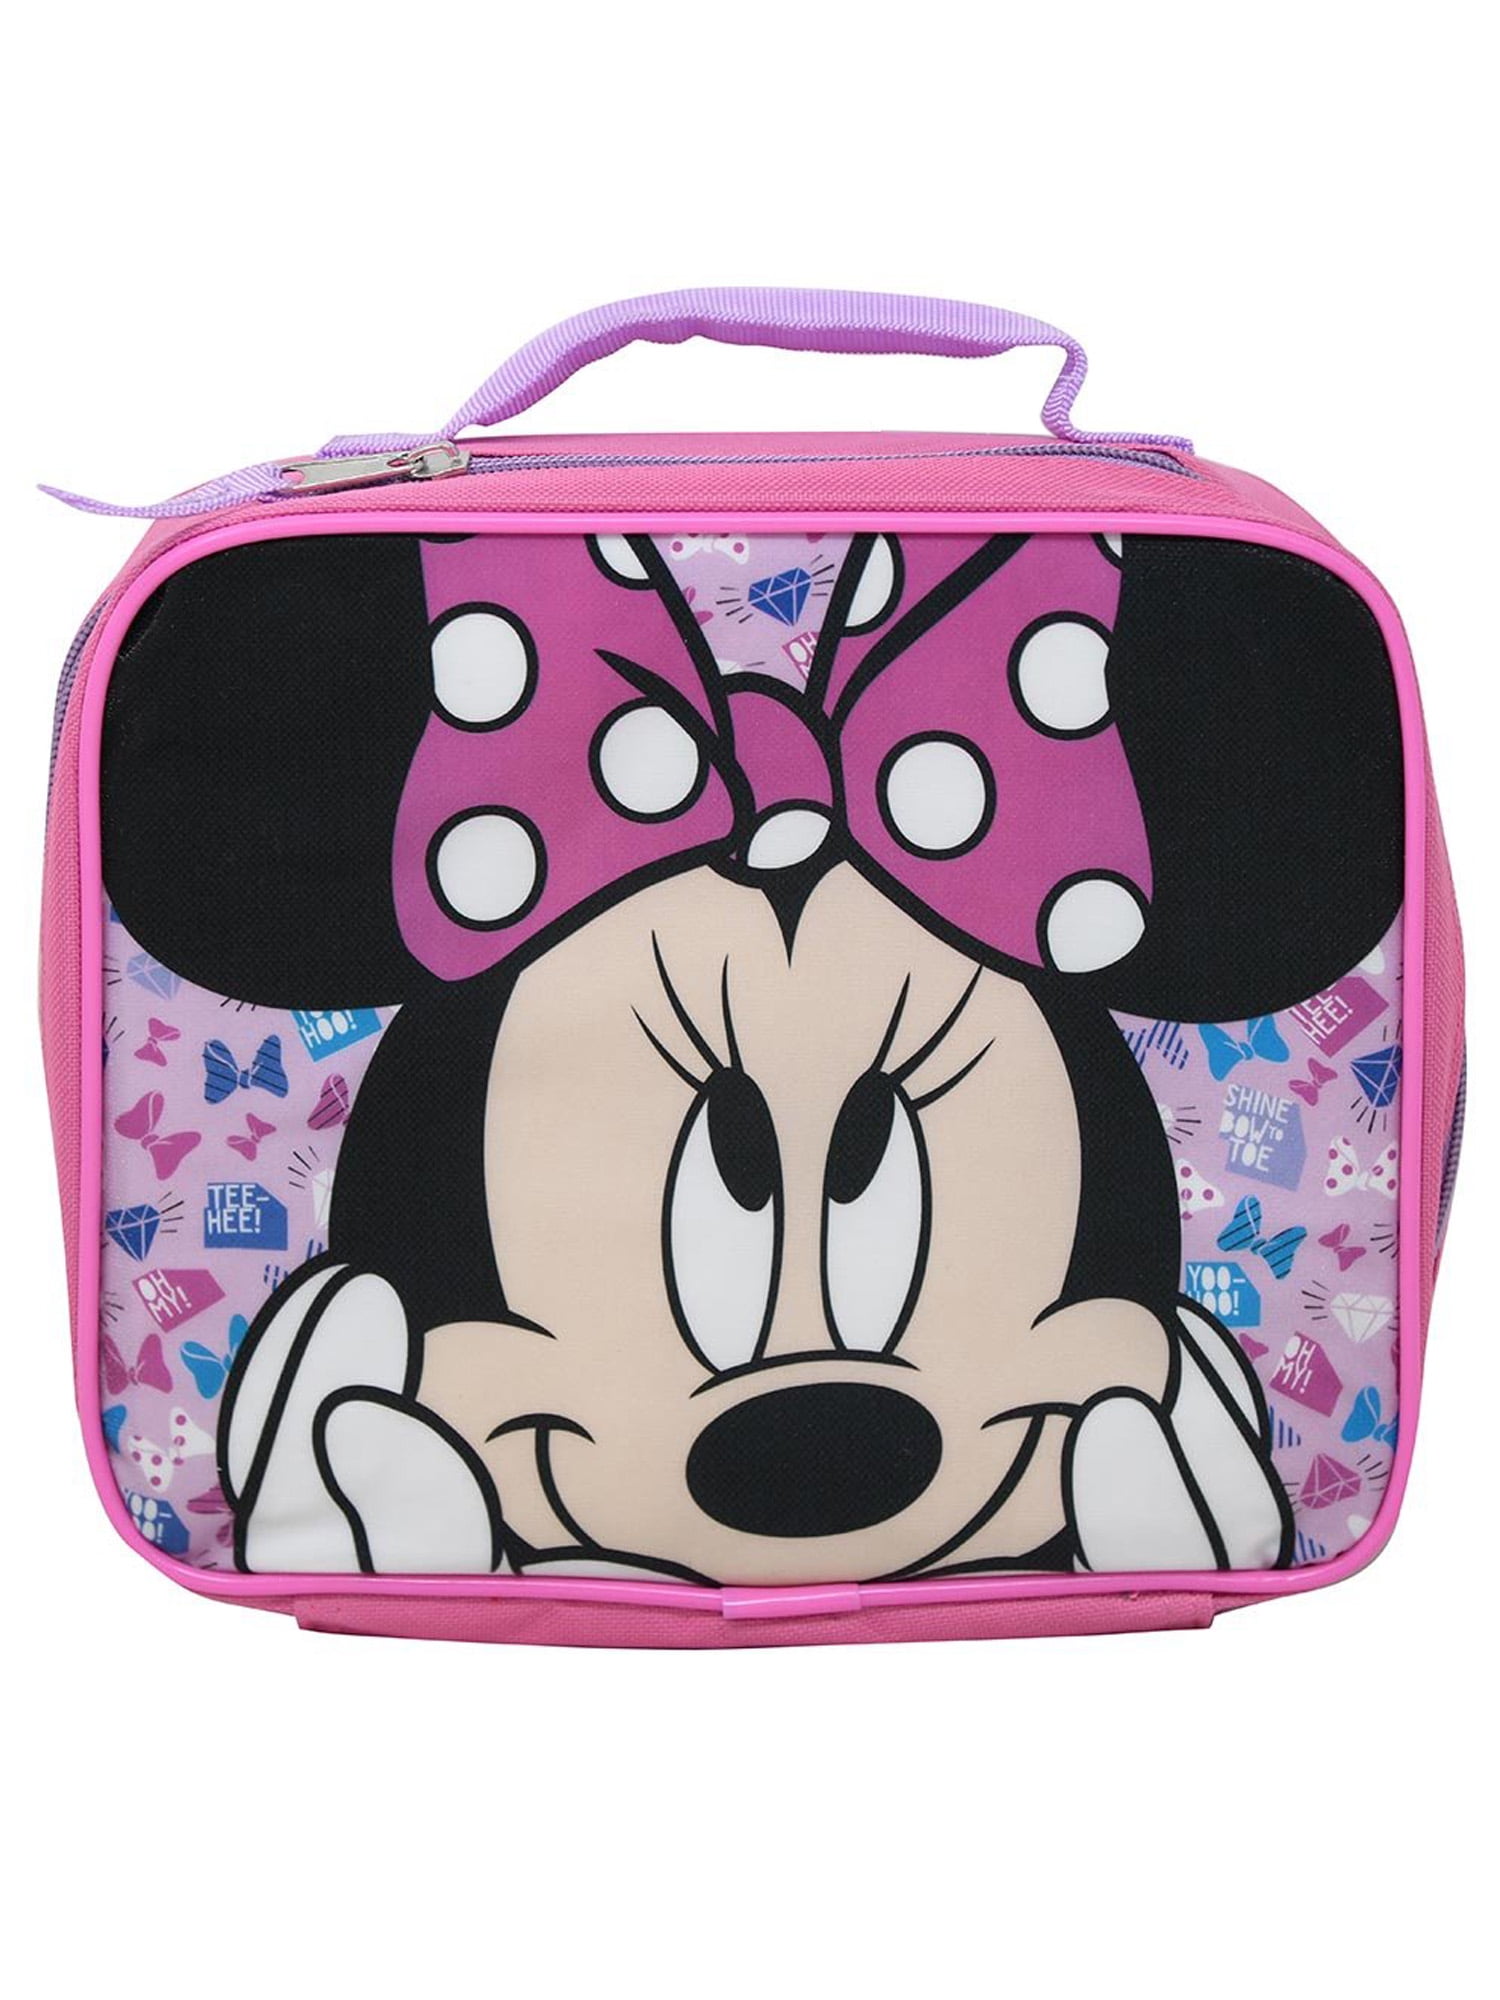 Minnie Mouse Insulated Lunch Bags  Insulated Minnie Mouse Cooler